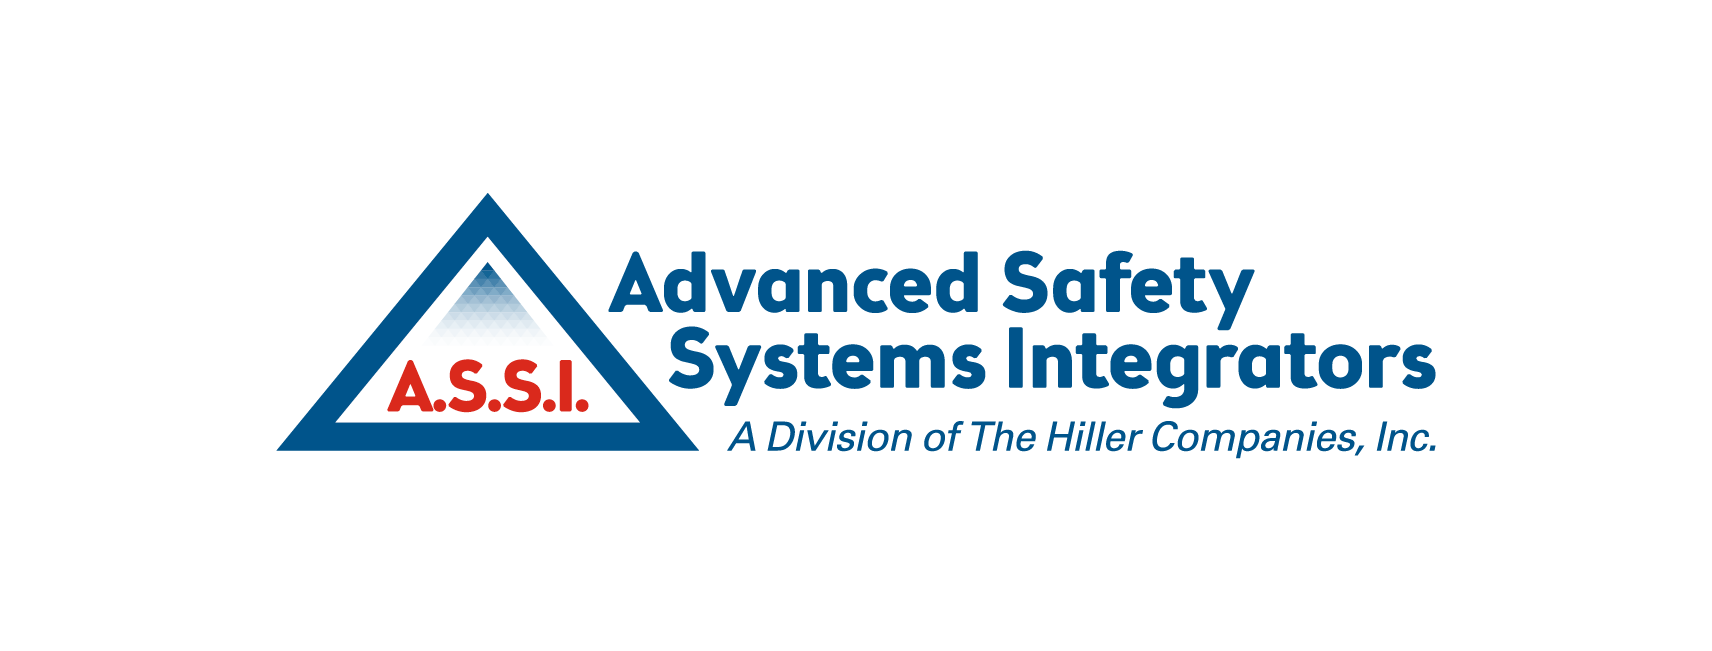 The Hiller Companies purchases Advanced Safety Systems Integrators serving the New England region of Massachusetts.